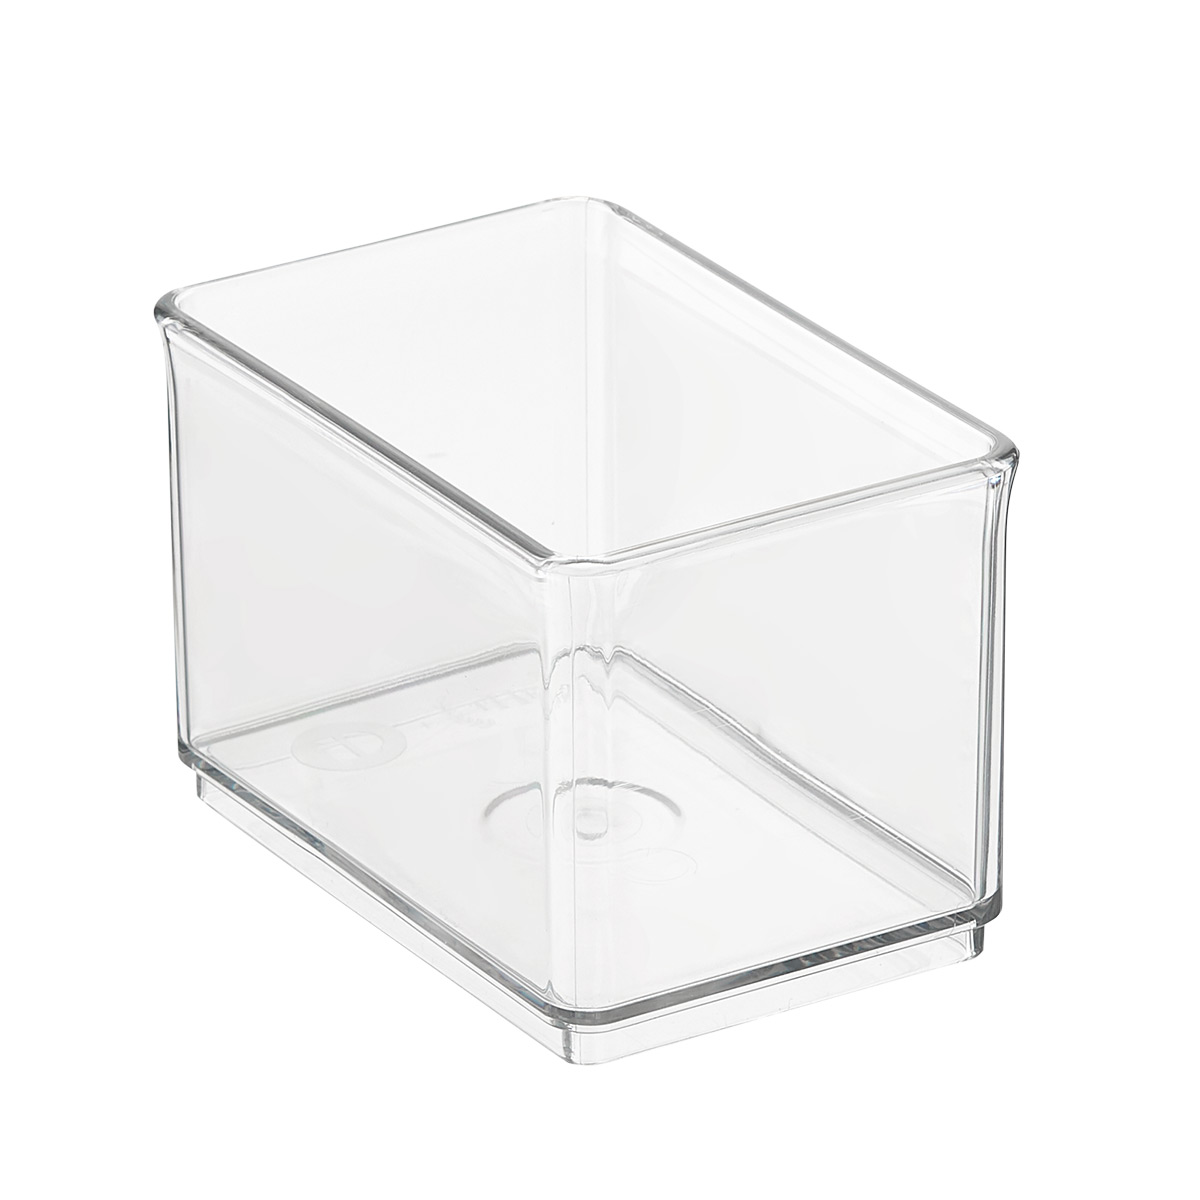 https://images.containerstore.com/catalogimages?sku=10077091